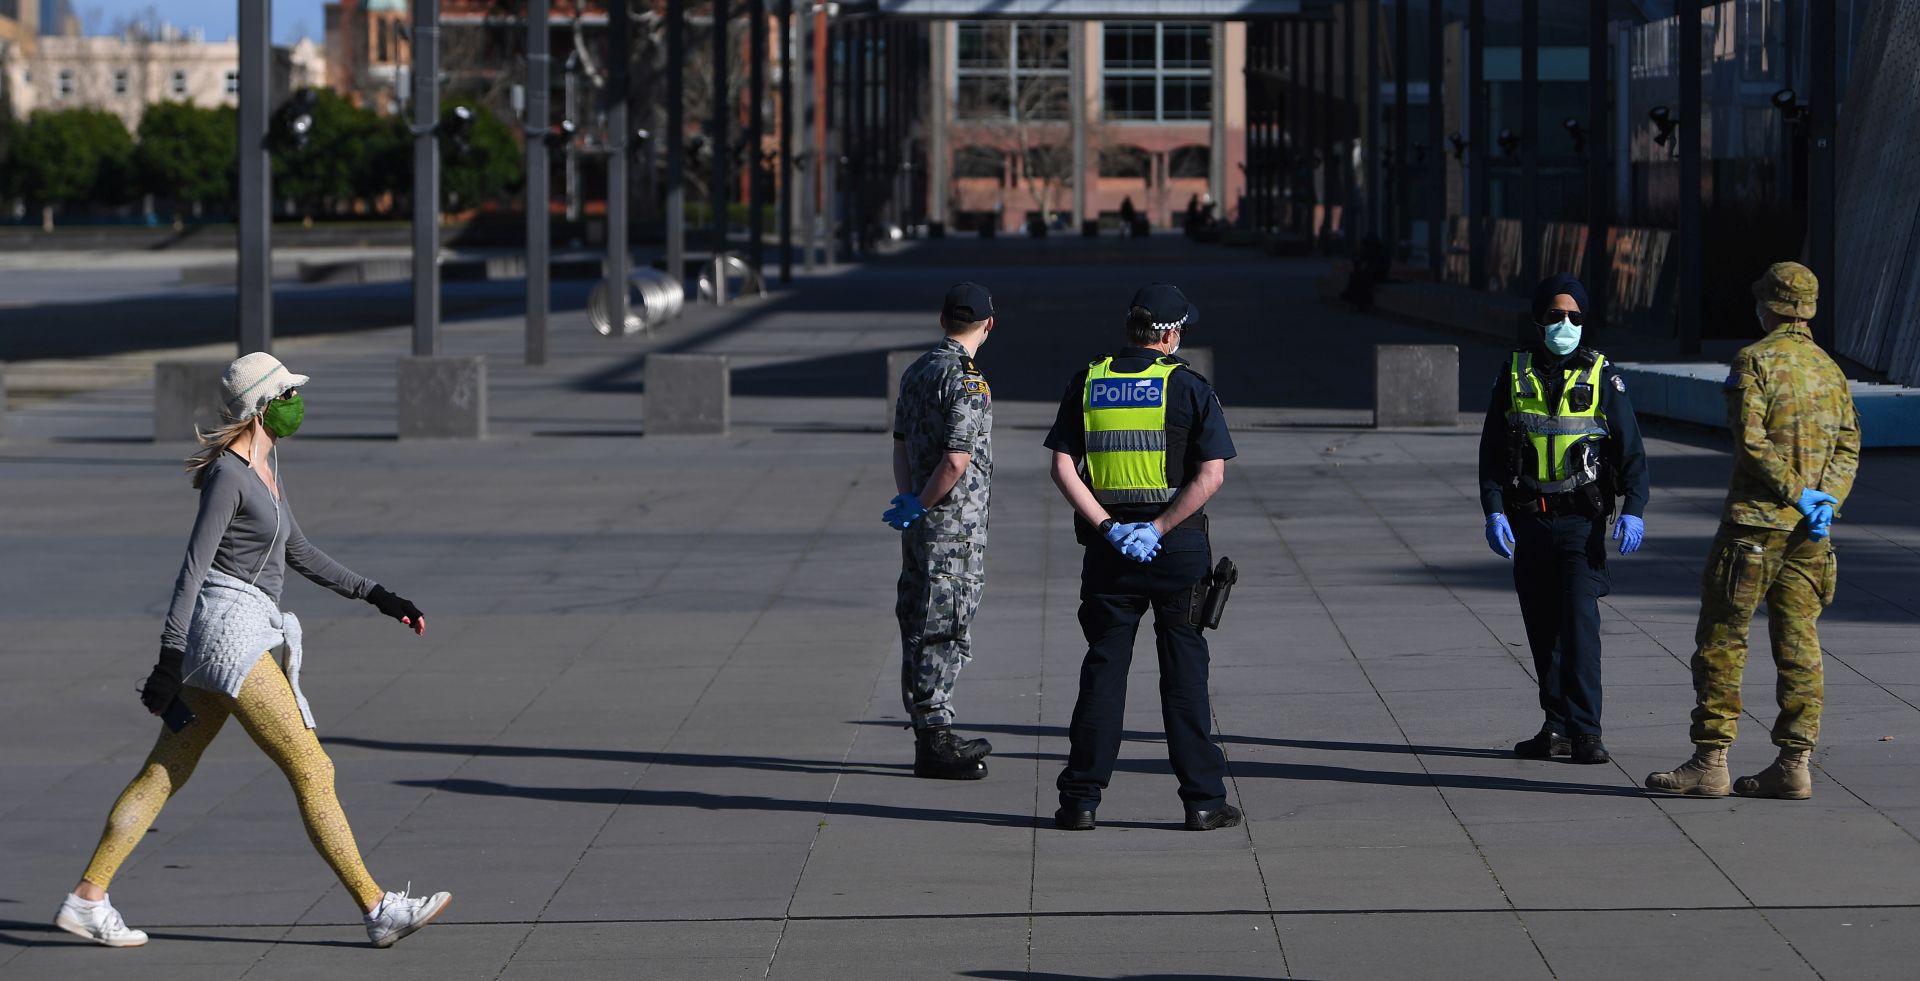 epa08615600 A person wearing a face mask walks past Victoria Police, Airforce and Australian  Defense Force (ADF) personnel outside of the Melbourne Museum in Melbourne, Victoria, Australia, 21 August 2020.  EPA/JAMES ROSS AUSTRALIA AND NEW ZEALAND OUT